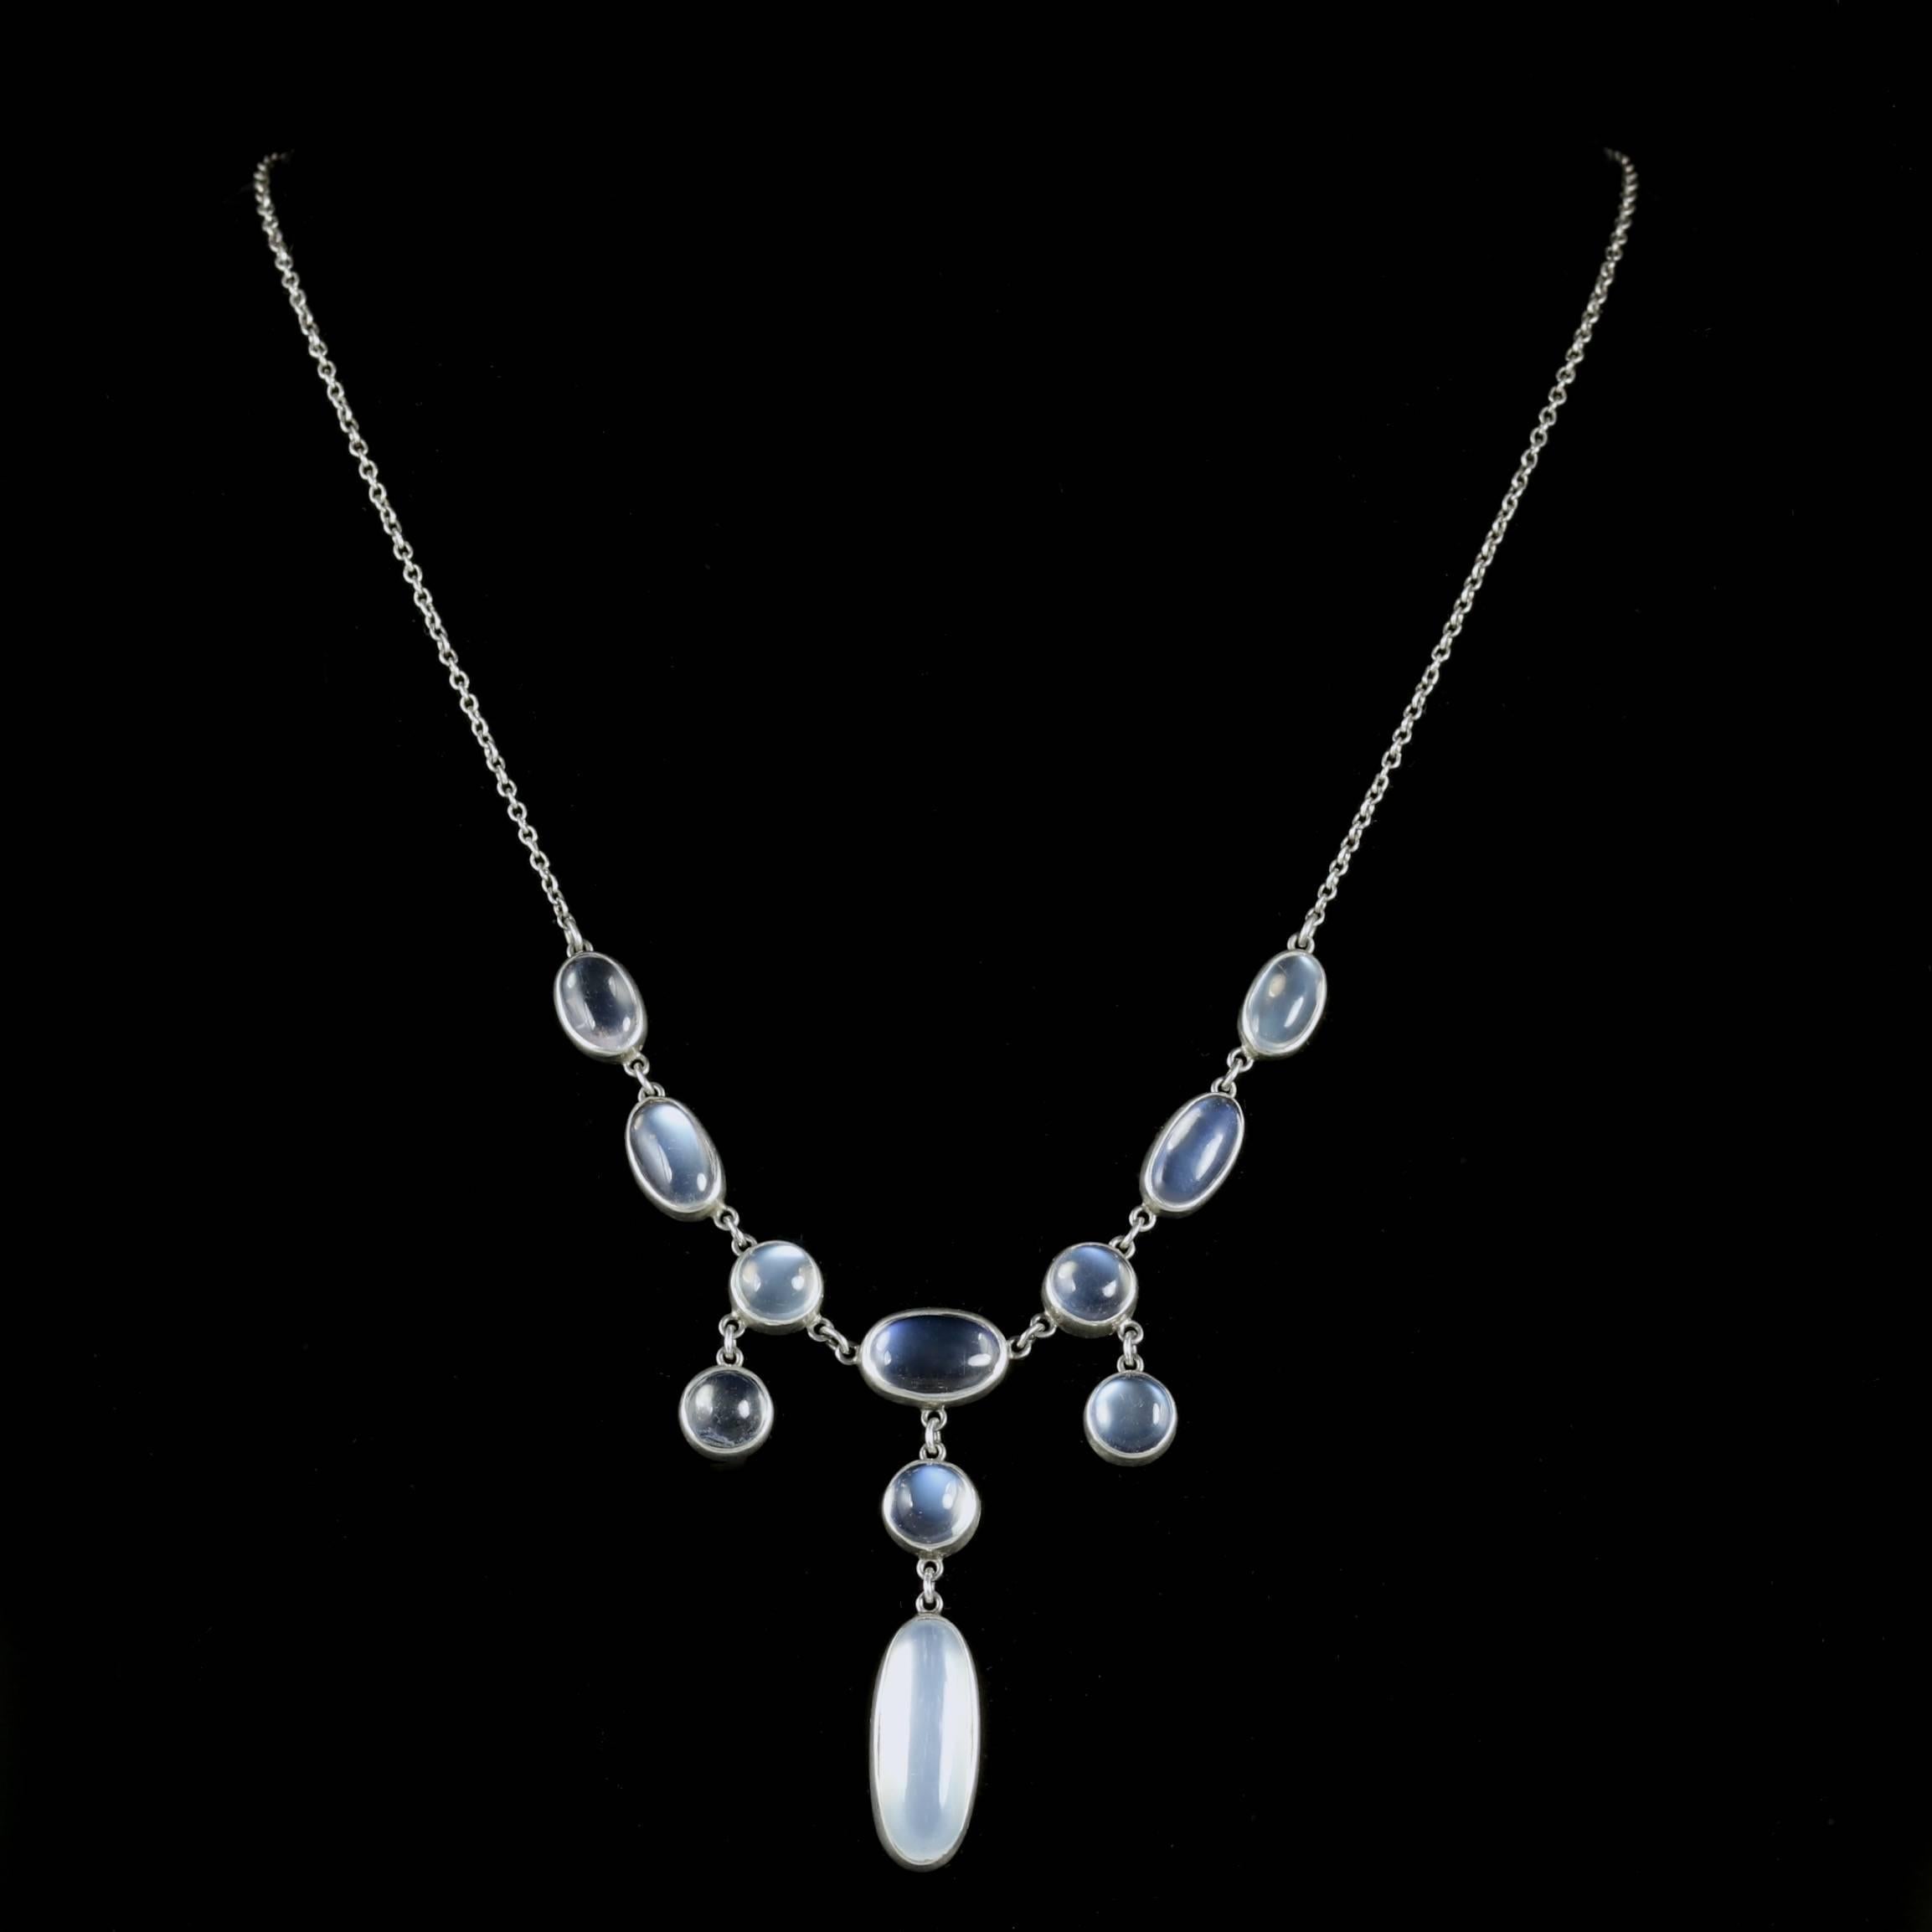 This elegant Victorian Silver necklace is set with glowing Moonstones that have a ghostly hue, Circa 1900.

A lovely Moonstone droppers hang wonderfully on this necklace.

The beautiful Moonstone has a lovely ghostly hue, since earliest times,